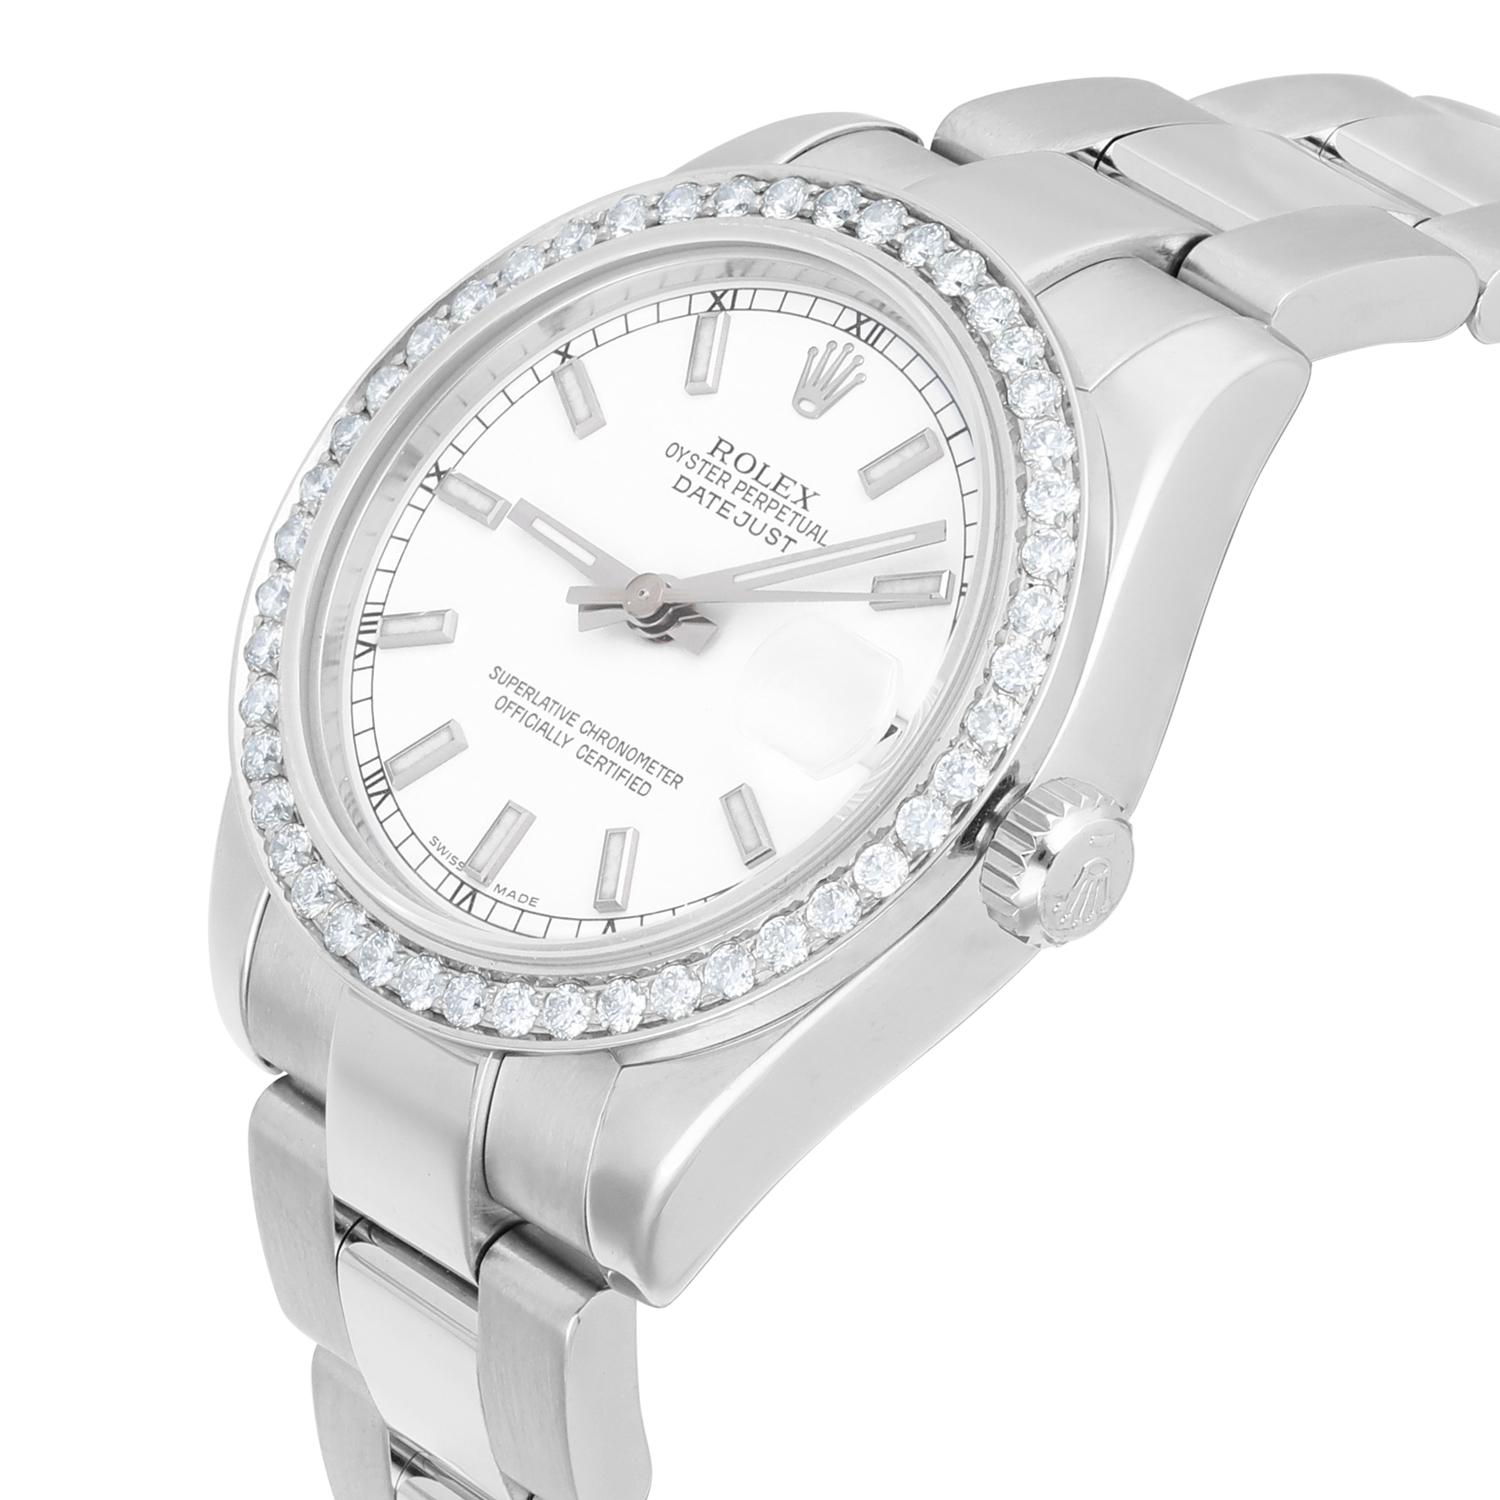 Women's Rolex Datejust 31 Stainless Steel White Dial with Diamond Bezel Watch 178240 For Sale